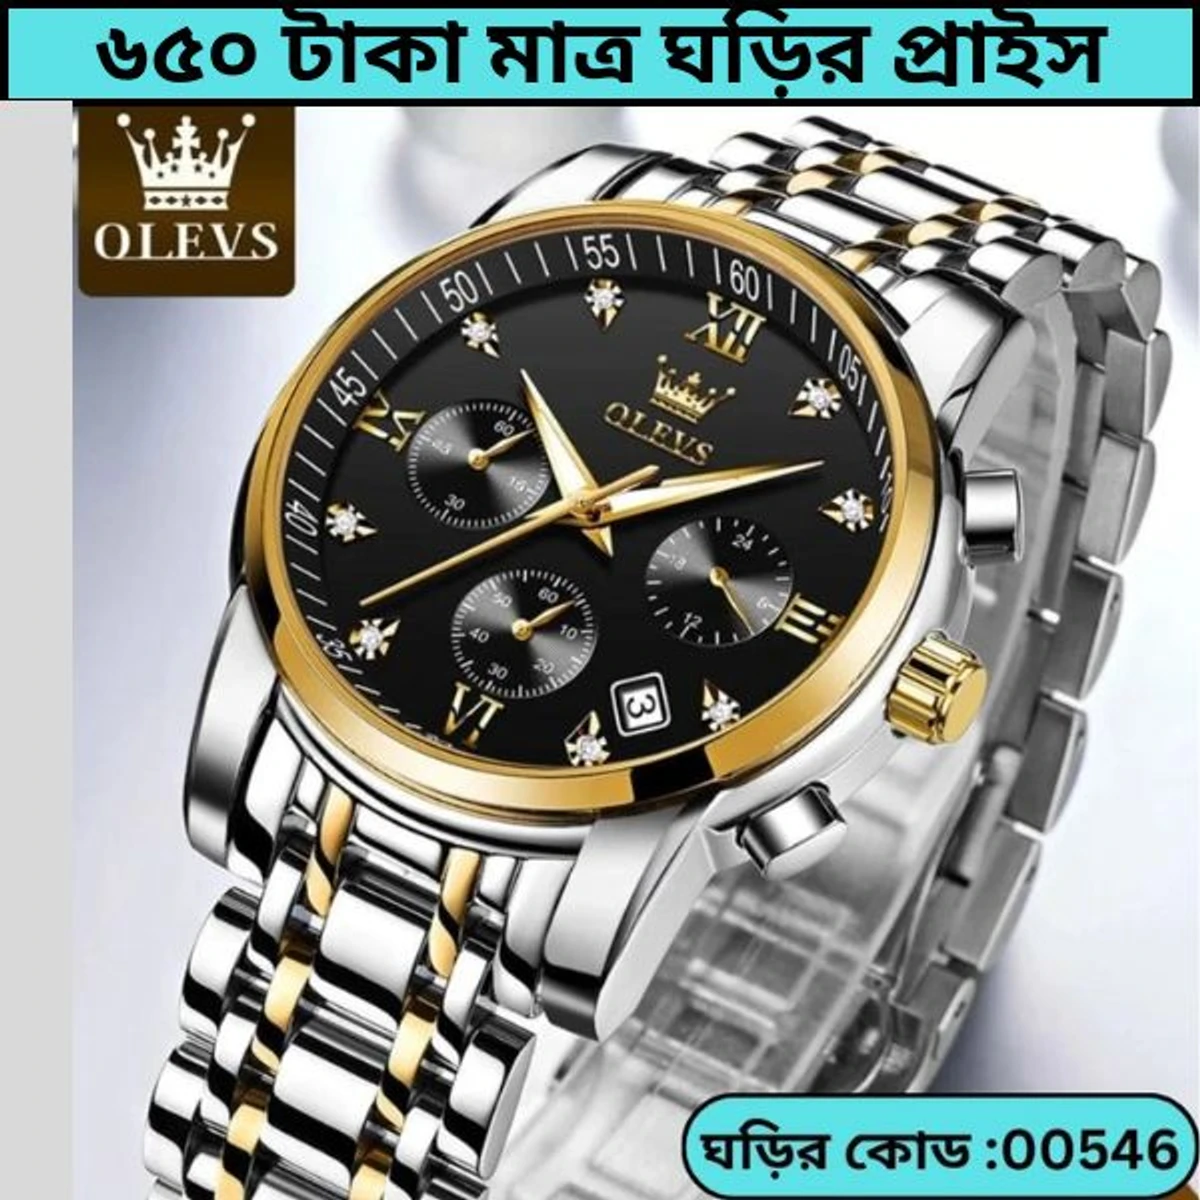 OLEVS MODEL 2858 Watch for Men Stainless Steel Watches - 2858 TOTON AR DIAL BLACK ROUND GOLDEN - MAN WATCH